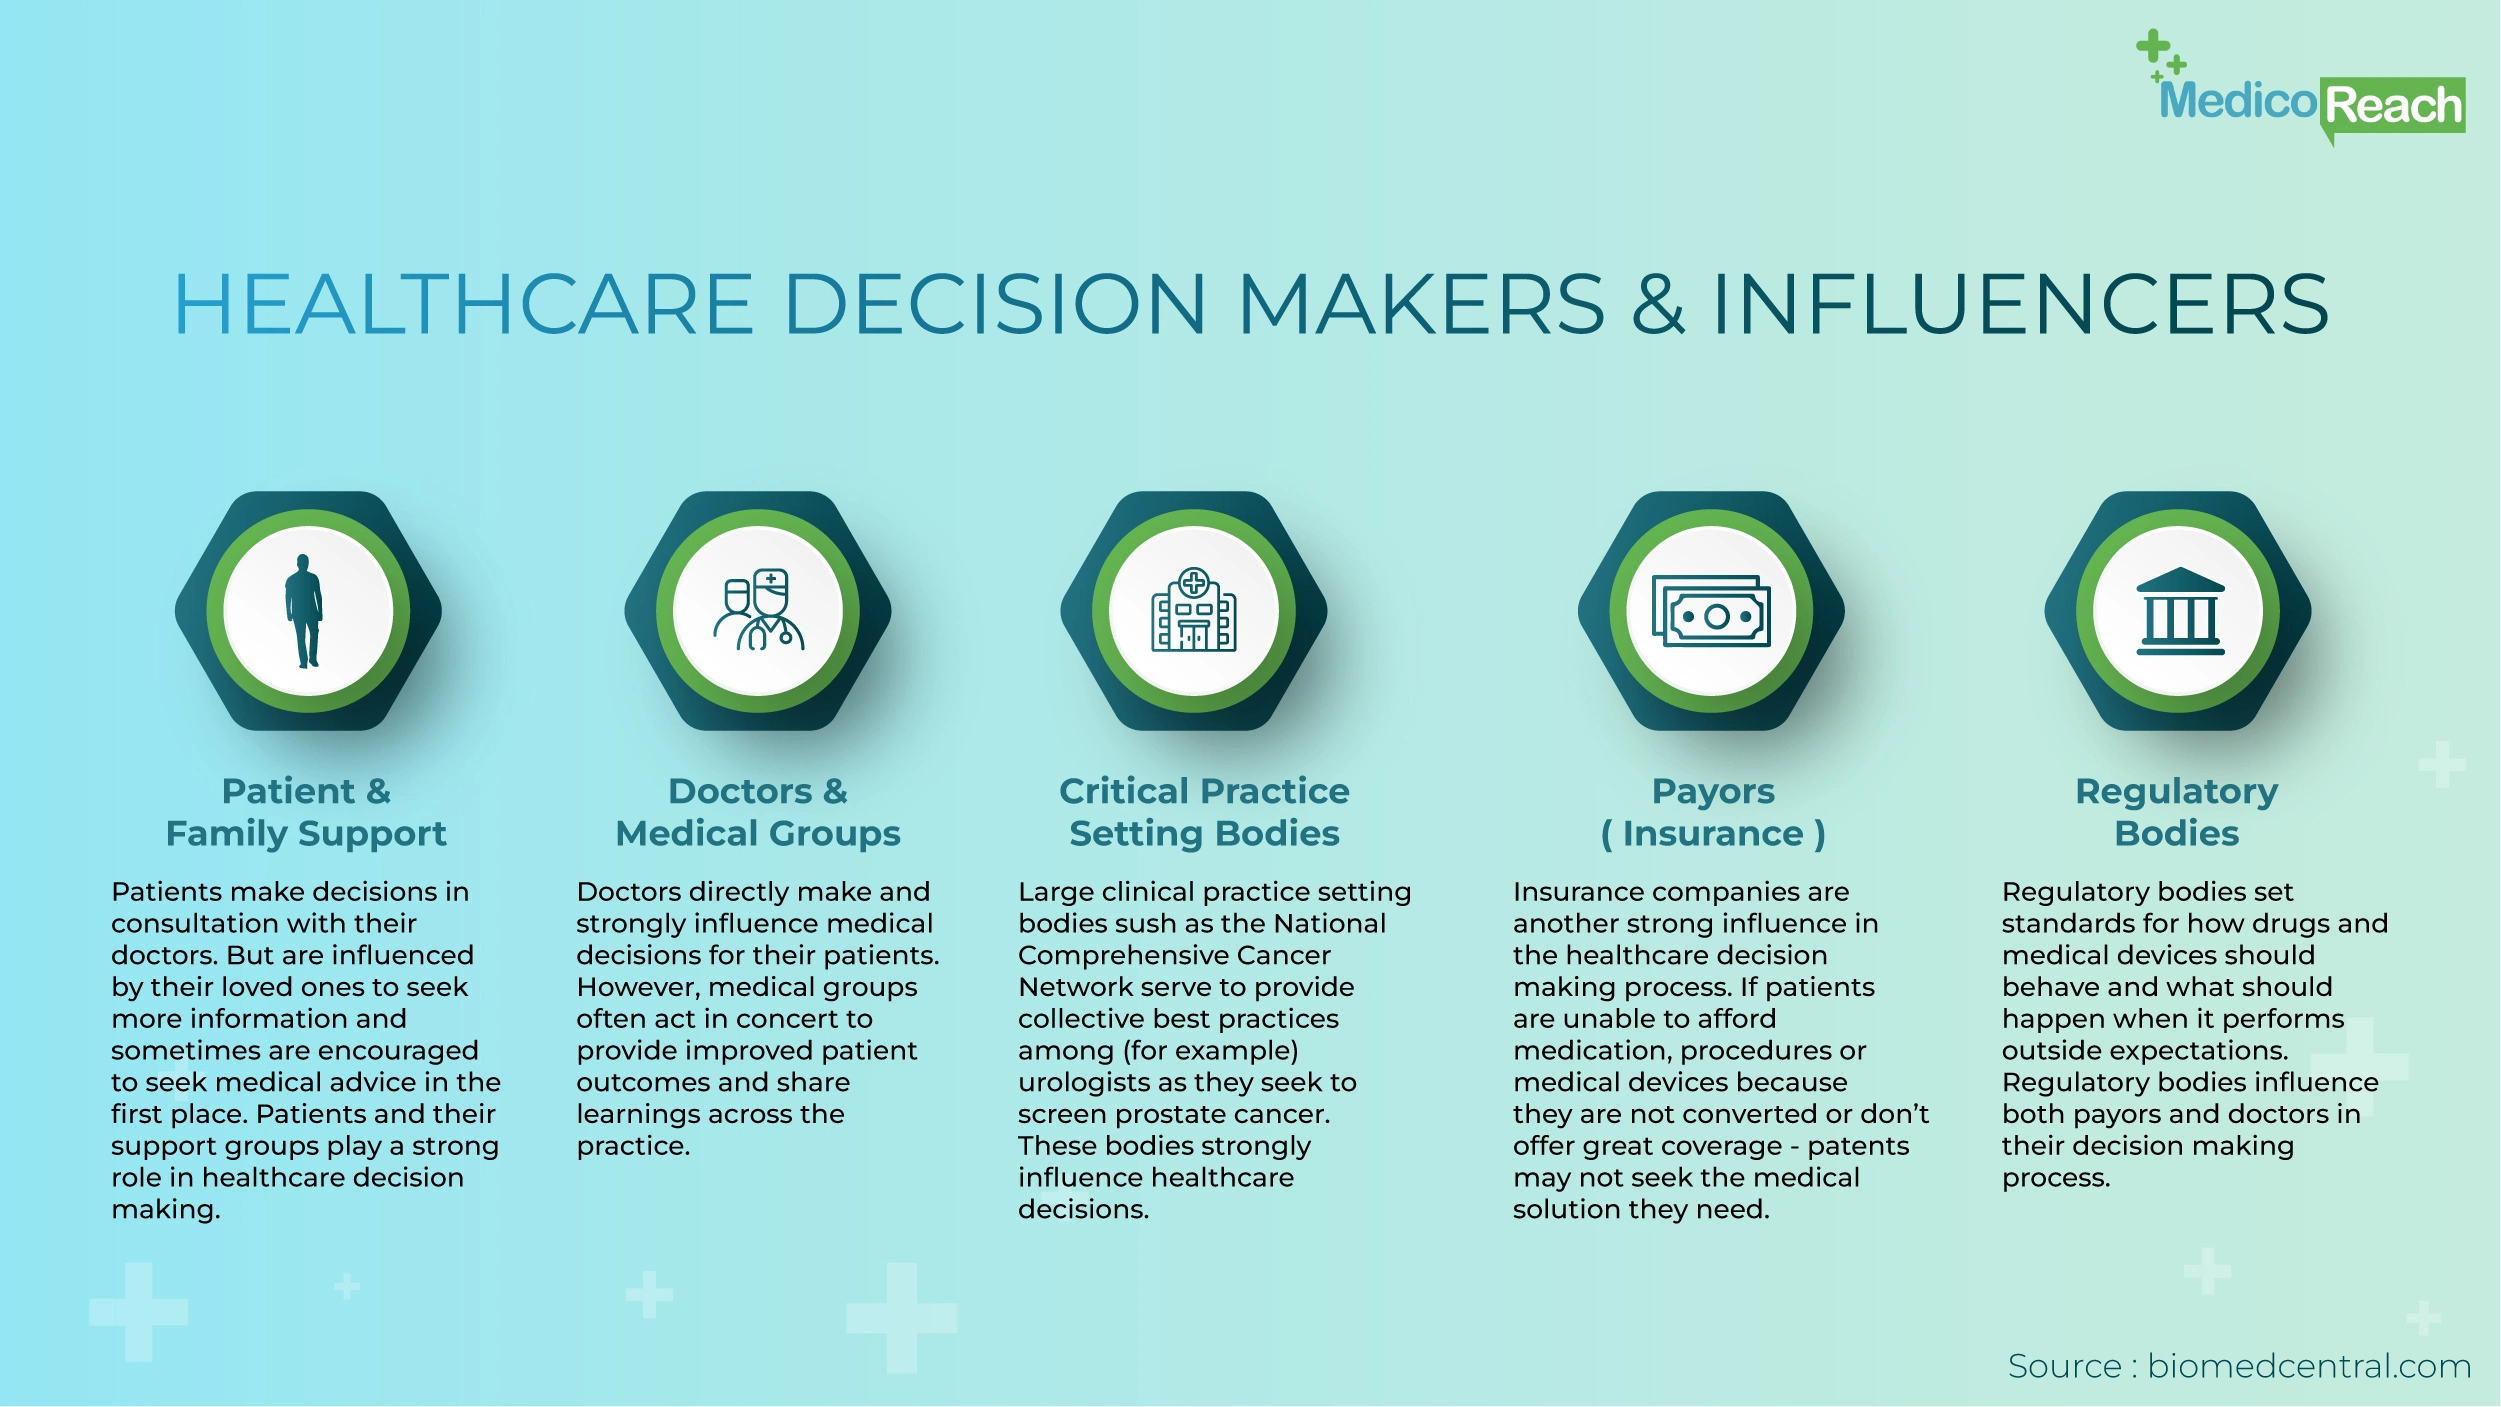 Roles-and-Responsibilities to Follow While Taking a Decision in Healthcare System